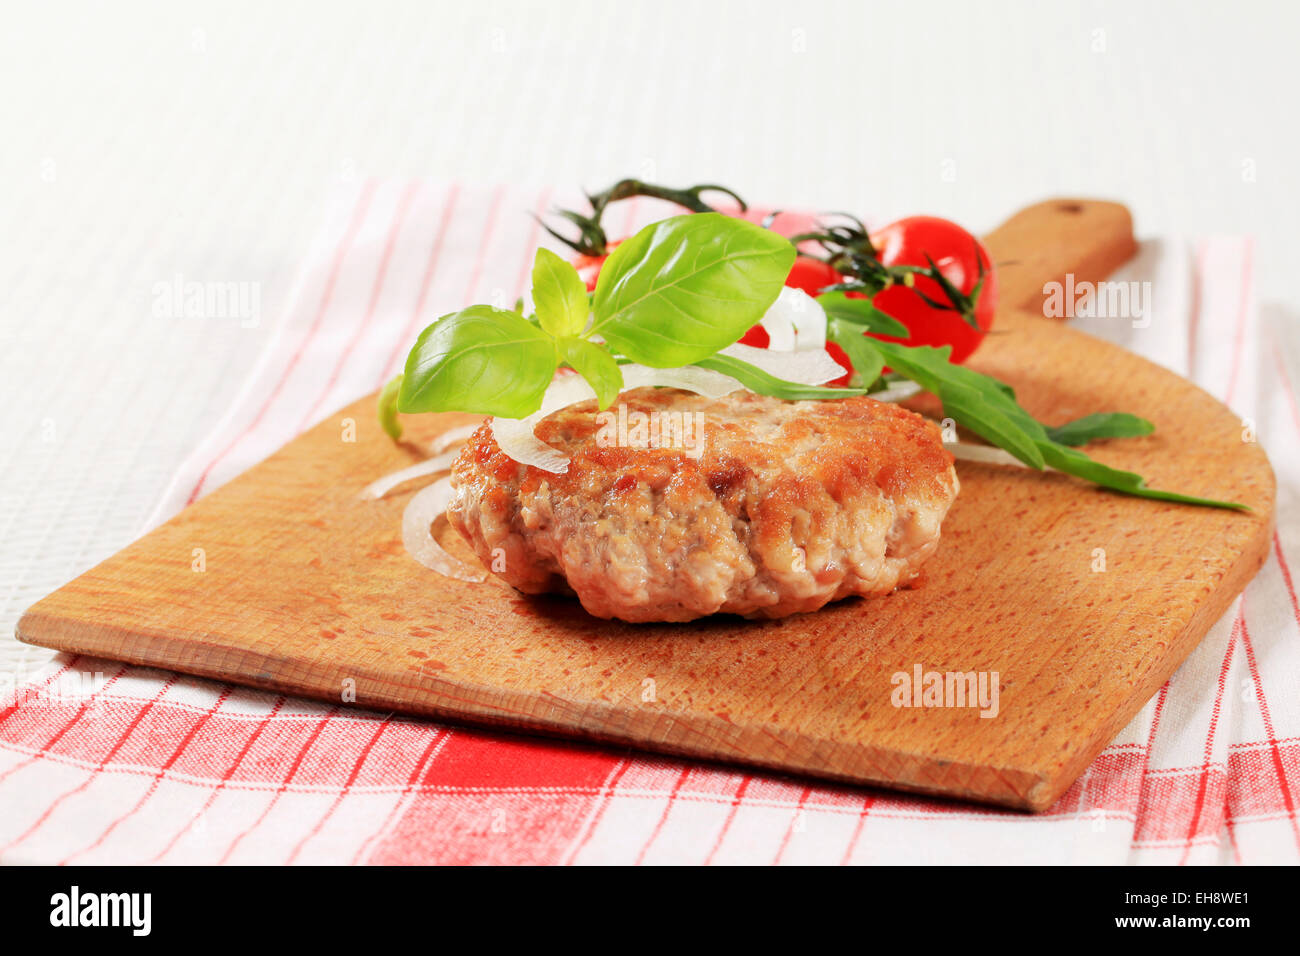 Pan fried meat patty on a cutting board Stock Photo